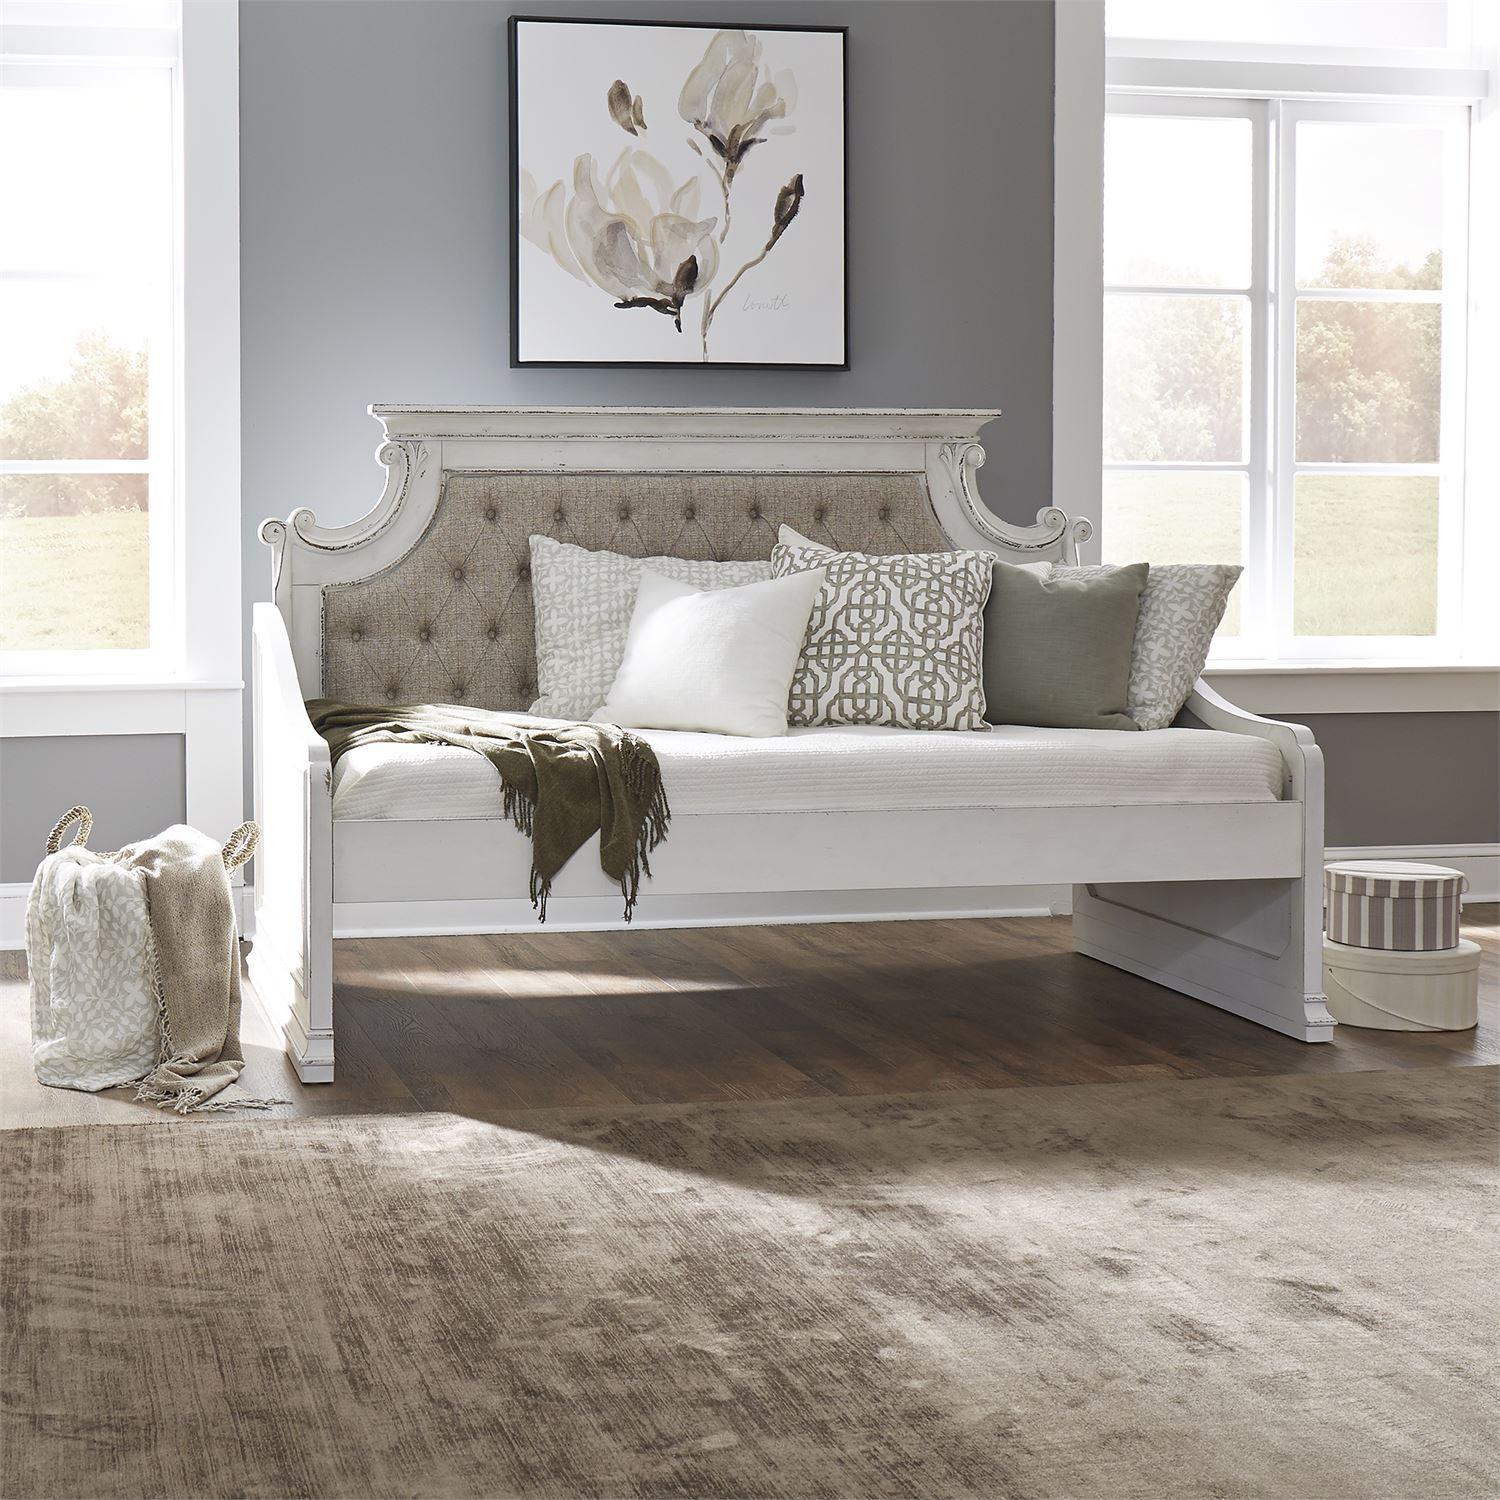 European Traditional Daybed Magnolia Manor  (244-DAY) Daybed 244-DAY-TDB in White Chenille